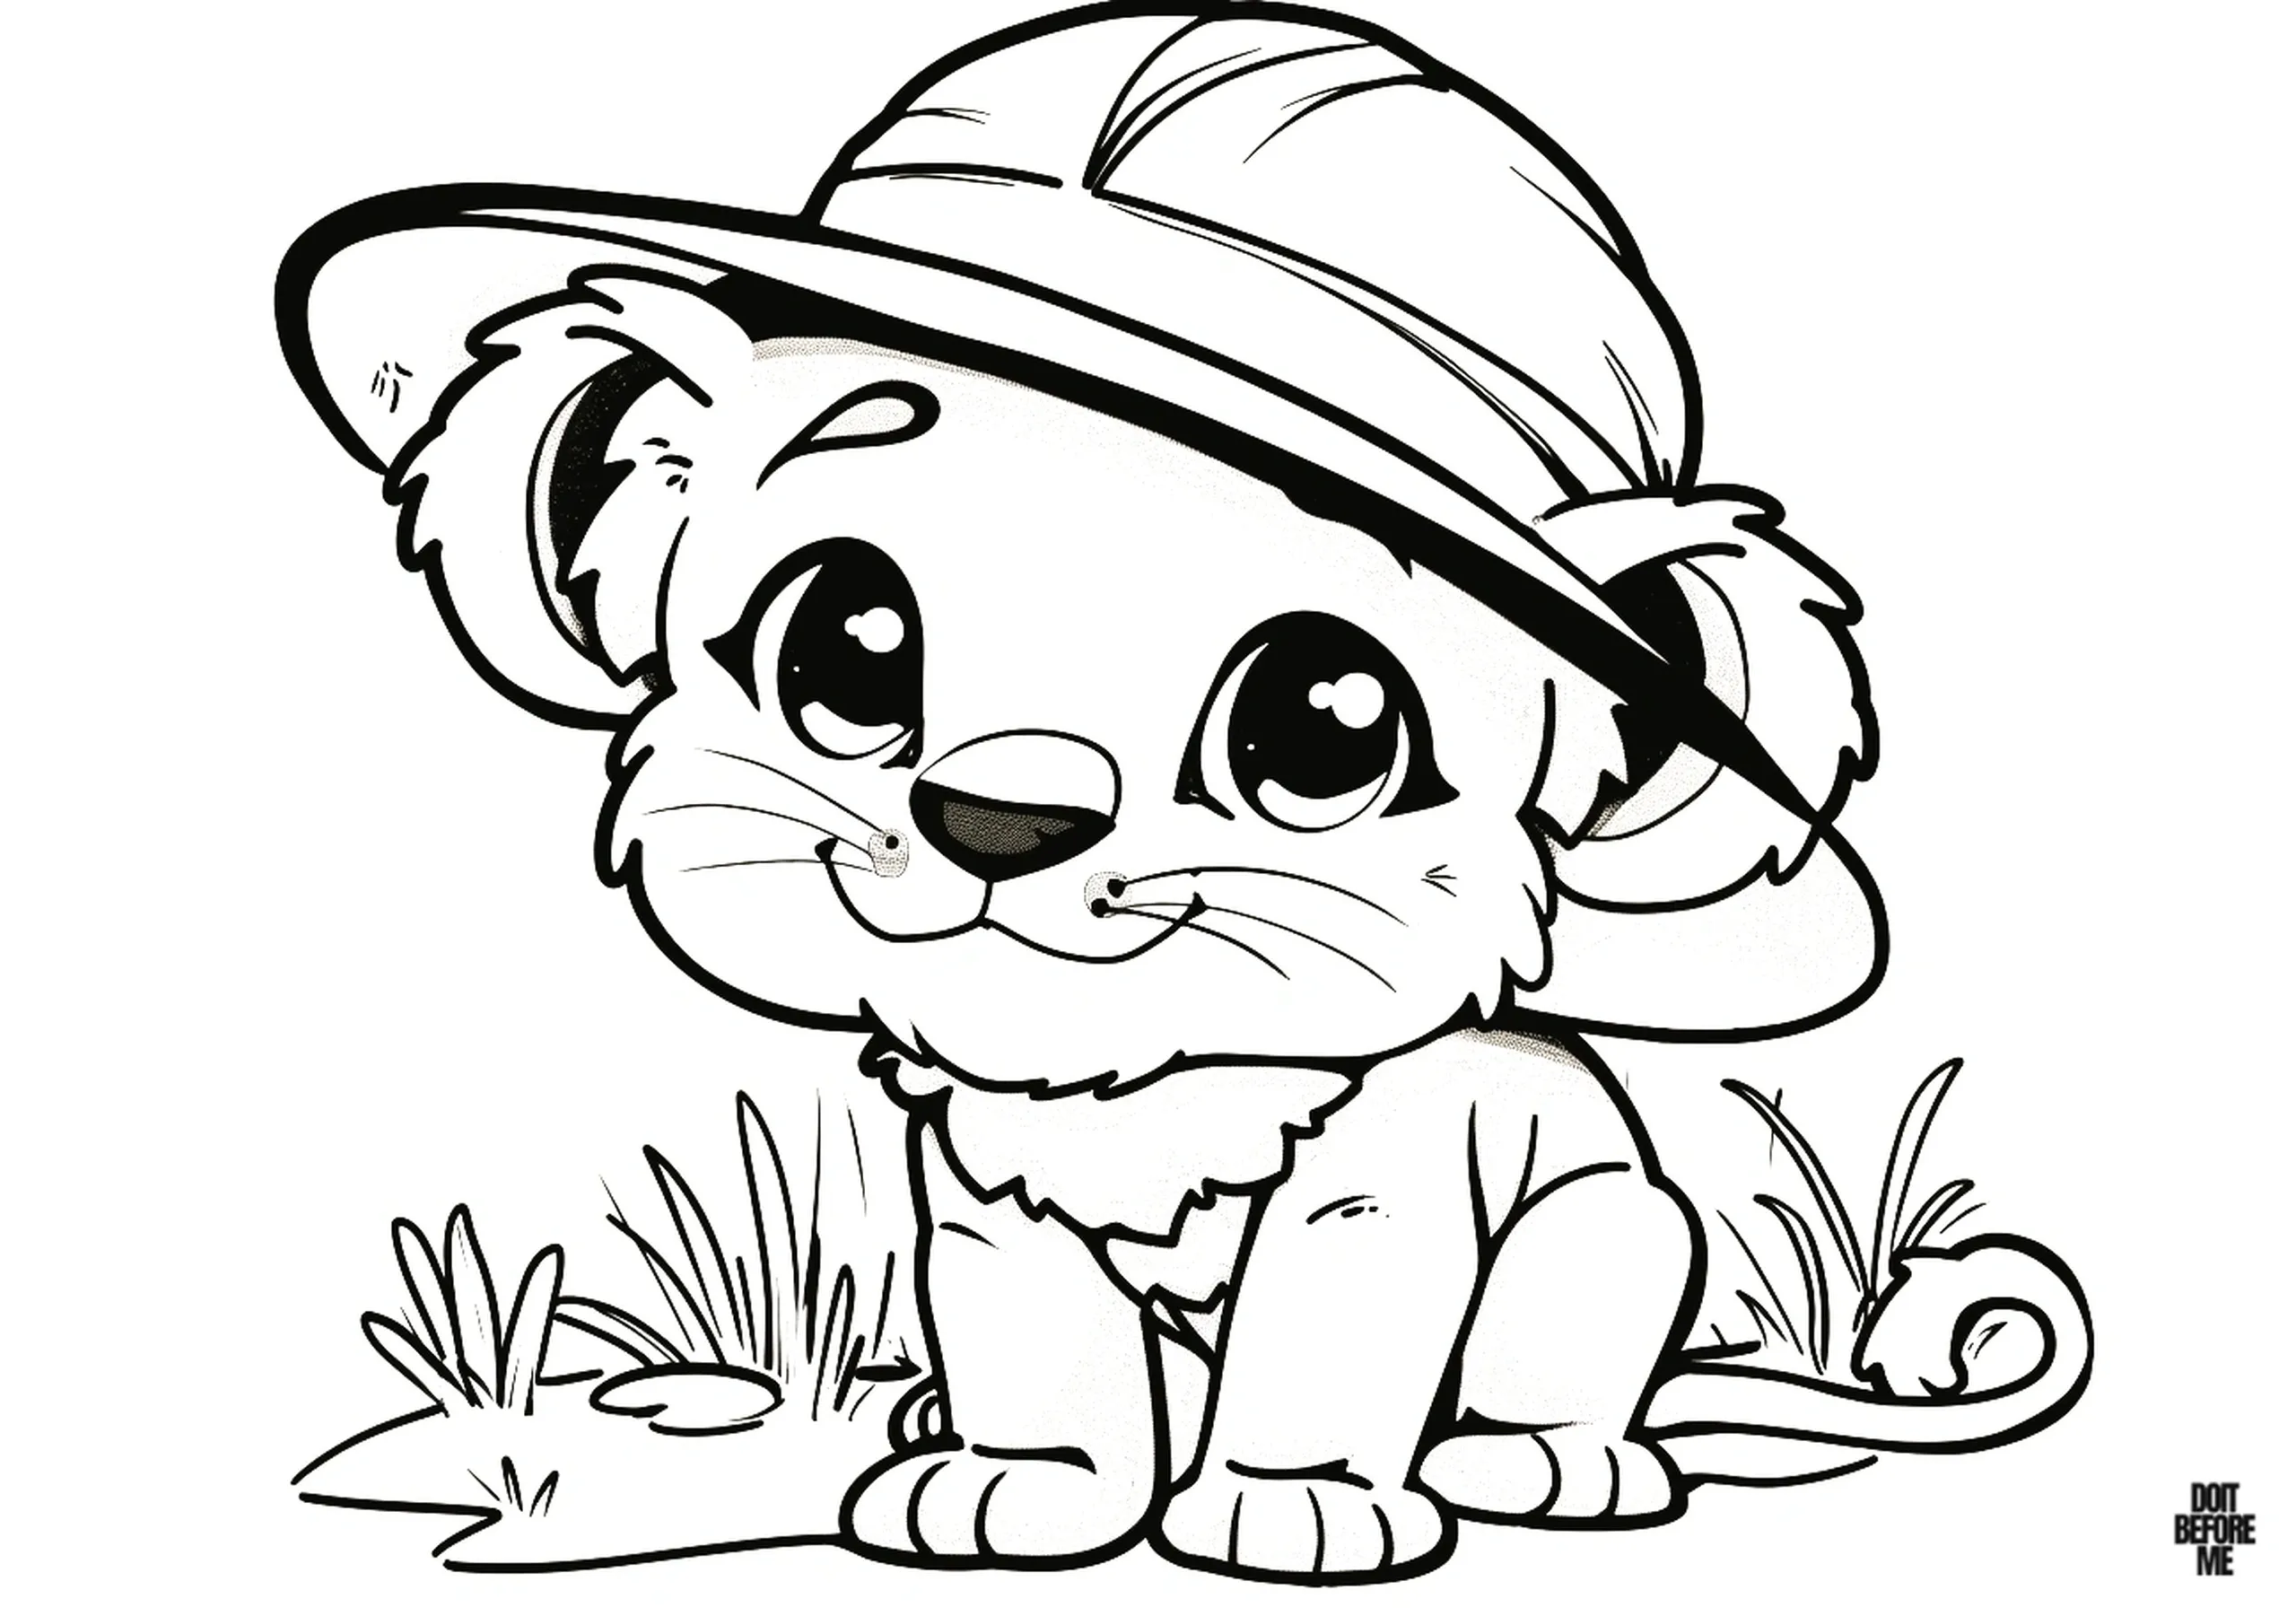 Printable coloring page featuring a big-headed, cute baby lion cub with a tiny hat, suitable for kids to color due to its simple and easy-to-color kawaii design.